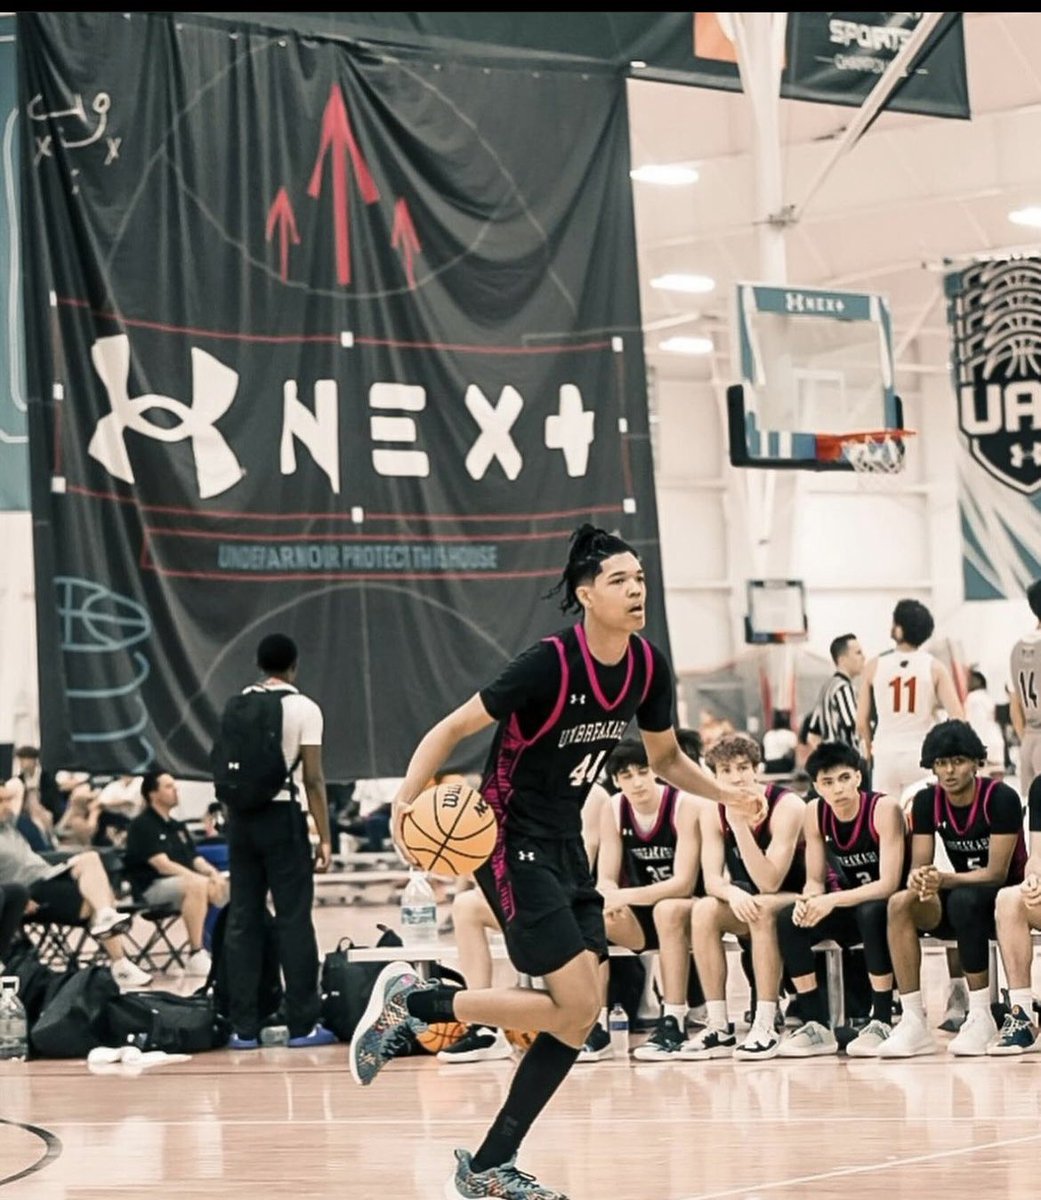 2025 @jyson_kim of @ub_austin is playing on the @RiseCircuit . He is the perfect “connector” for any team he plays on. He shows his versatility on offense and defense, extremely smart kid on and off the floor, has high upside for the next level. His best basketball is ahead.